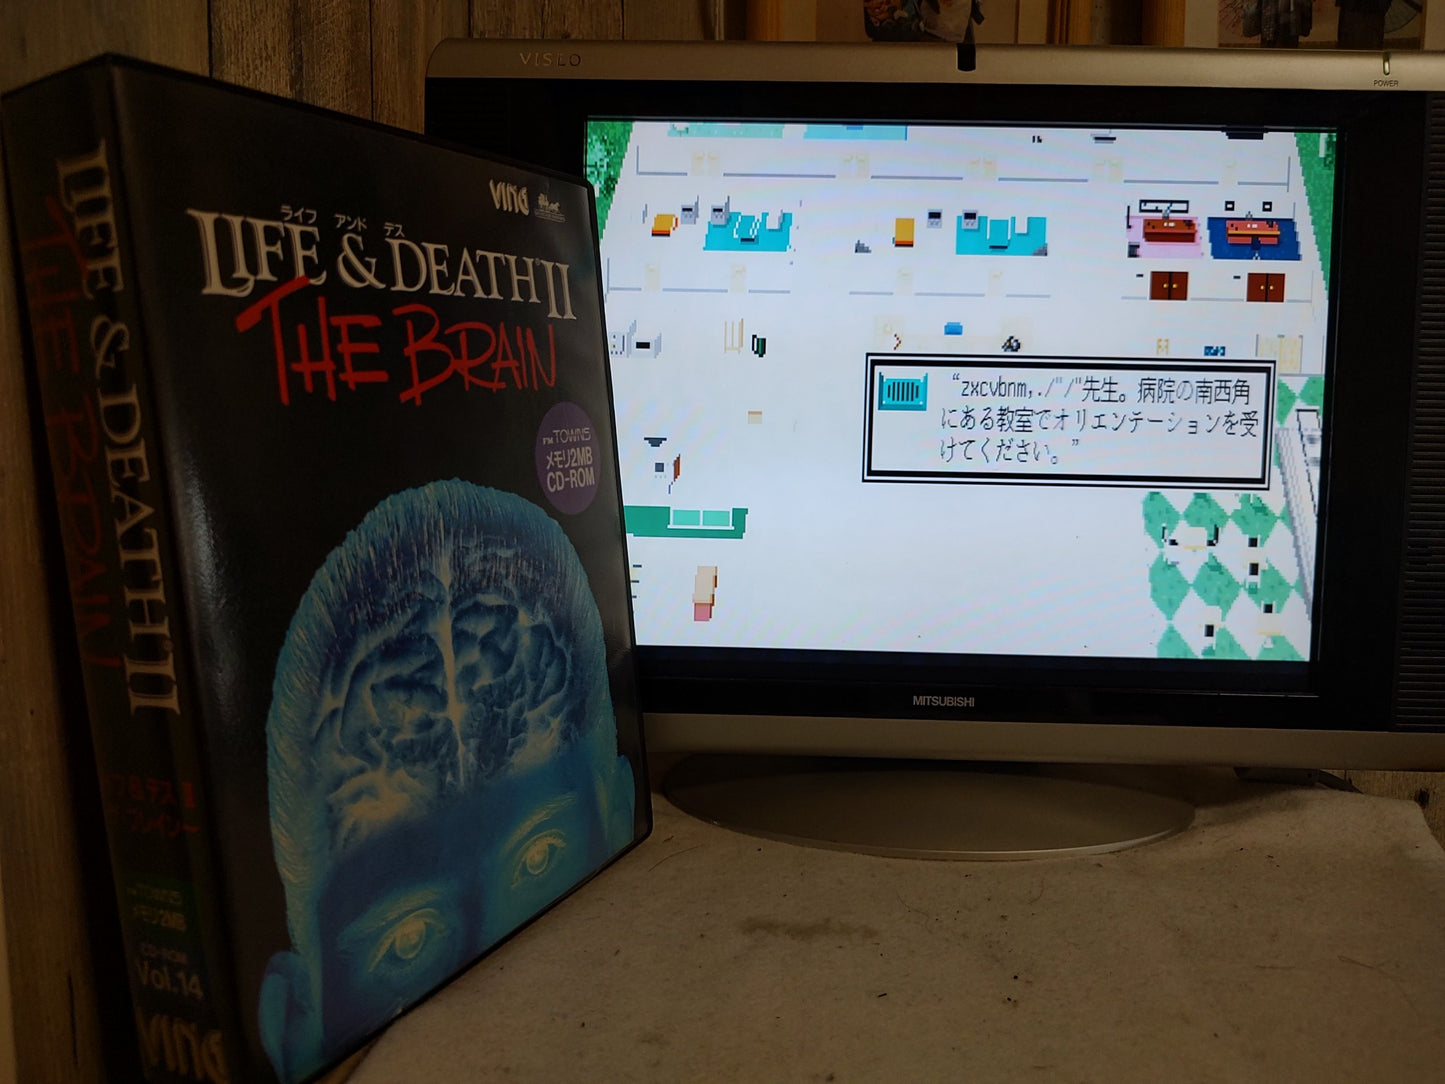 LIFE AND DEATH 2 THE BRAIN FM TOWNS Marty Game w/Manual, Box set, Working-f1006-